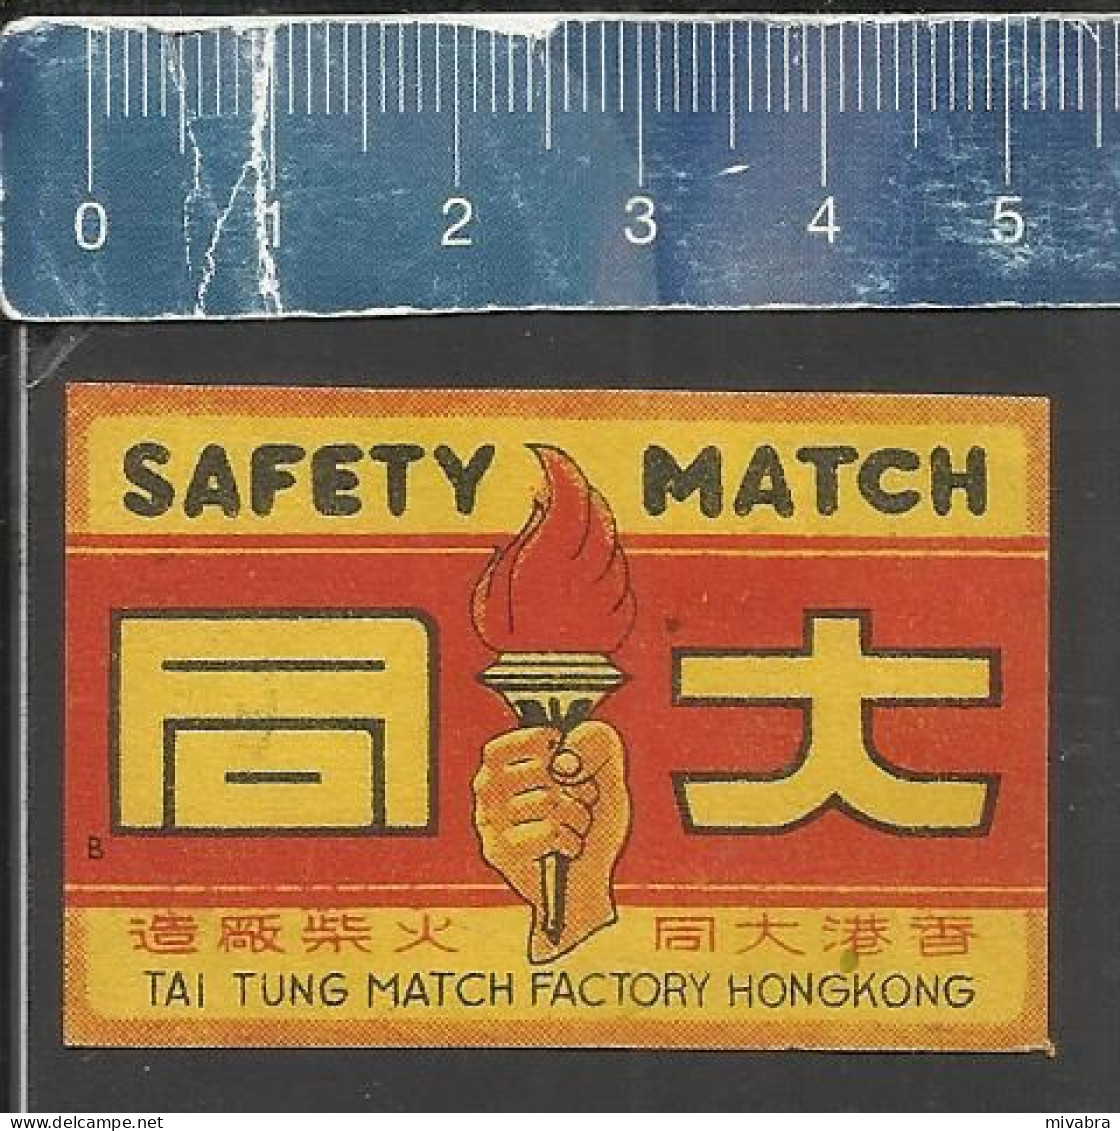 HAND HOLDING BURNING TORCH   - OLD VINTAGE MATCHBOX LABEL TAI TUNG MATCH FACTORY HONGKONG - Boites D'allumettes - Etiquettes